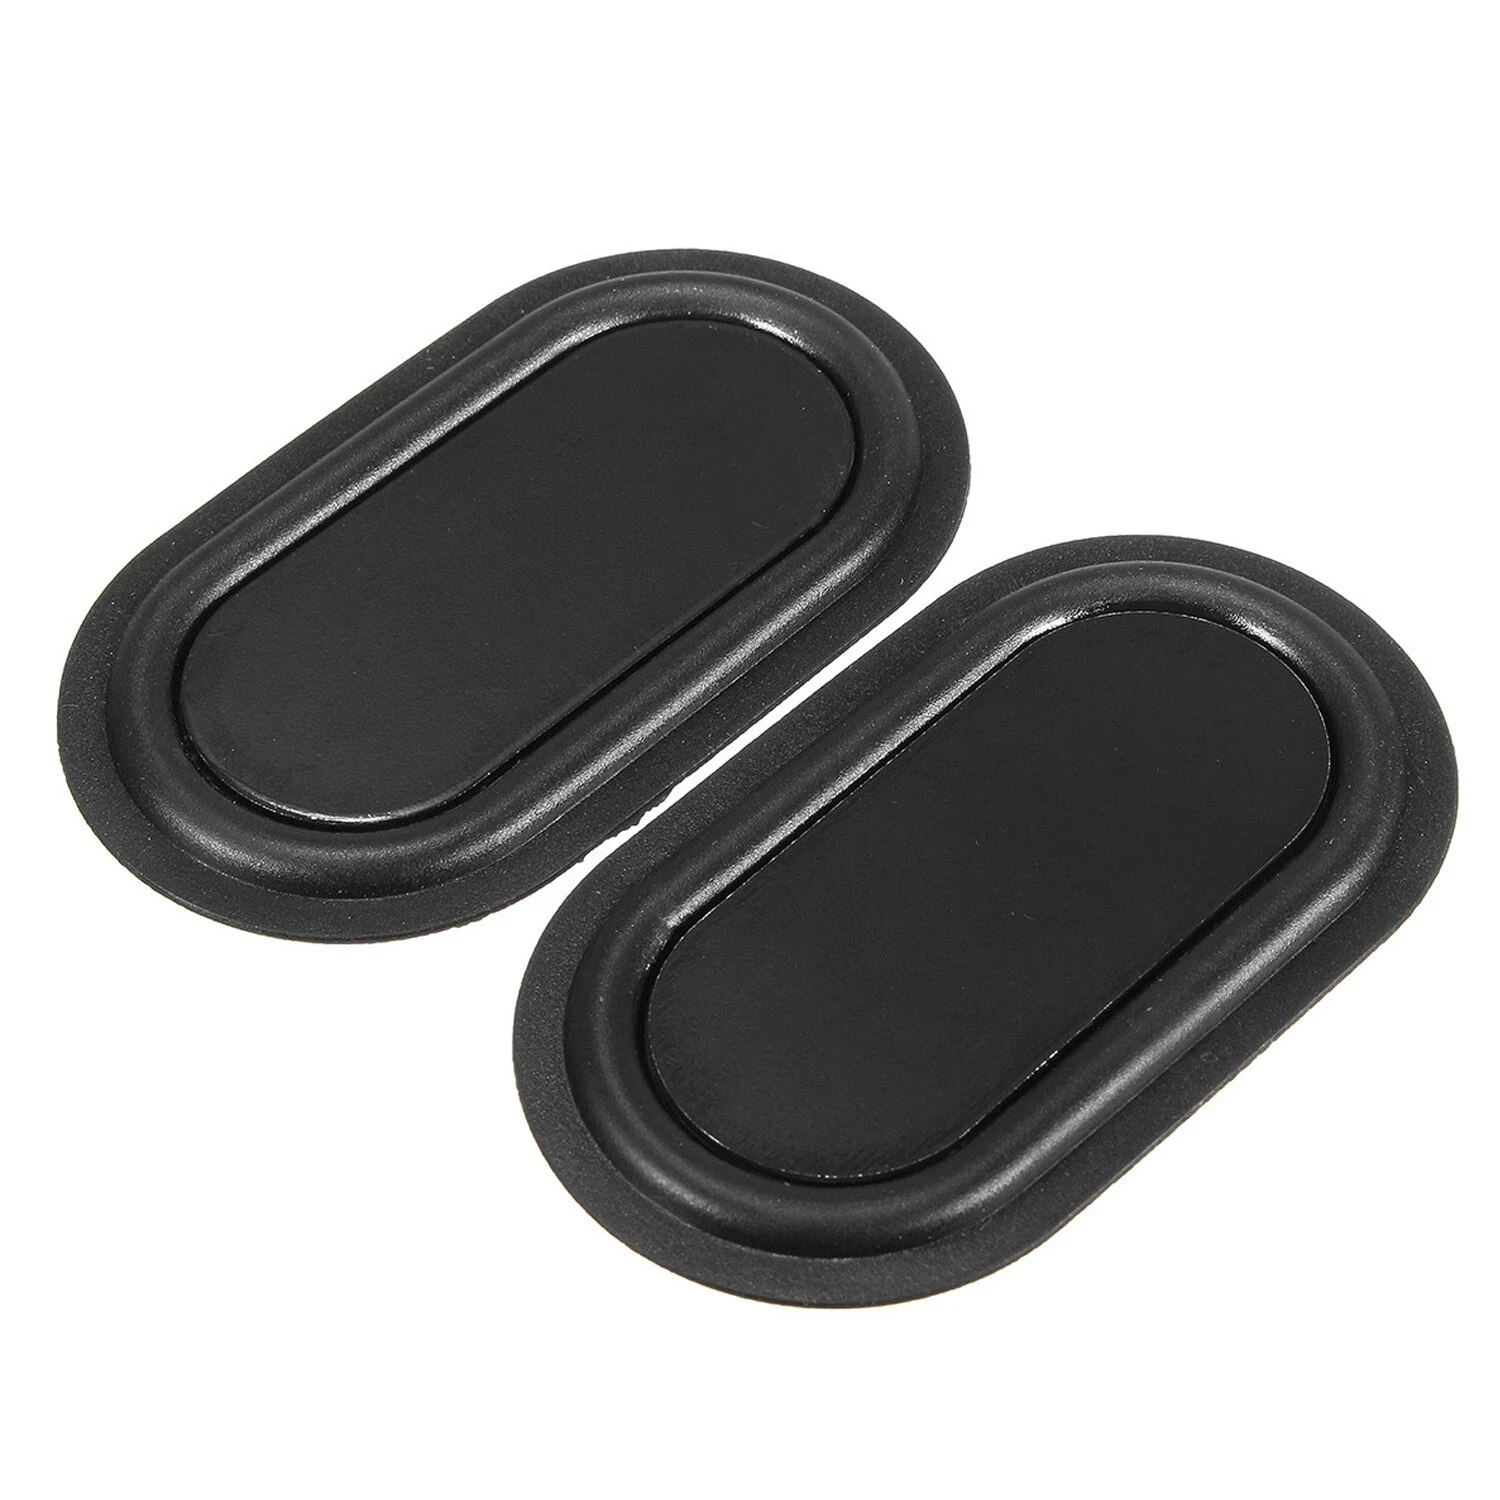 80 x 40mm Speaker Passive Radiator Auxiliary Plate Durable Rubber Bass Vibration Plate Speaker Accessories